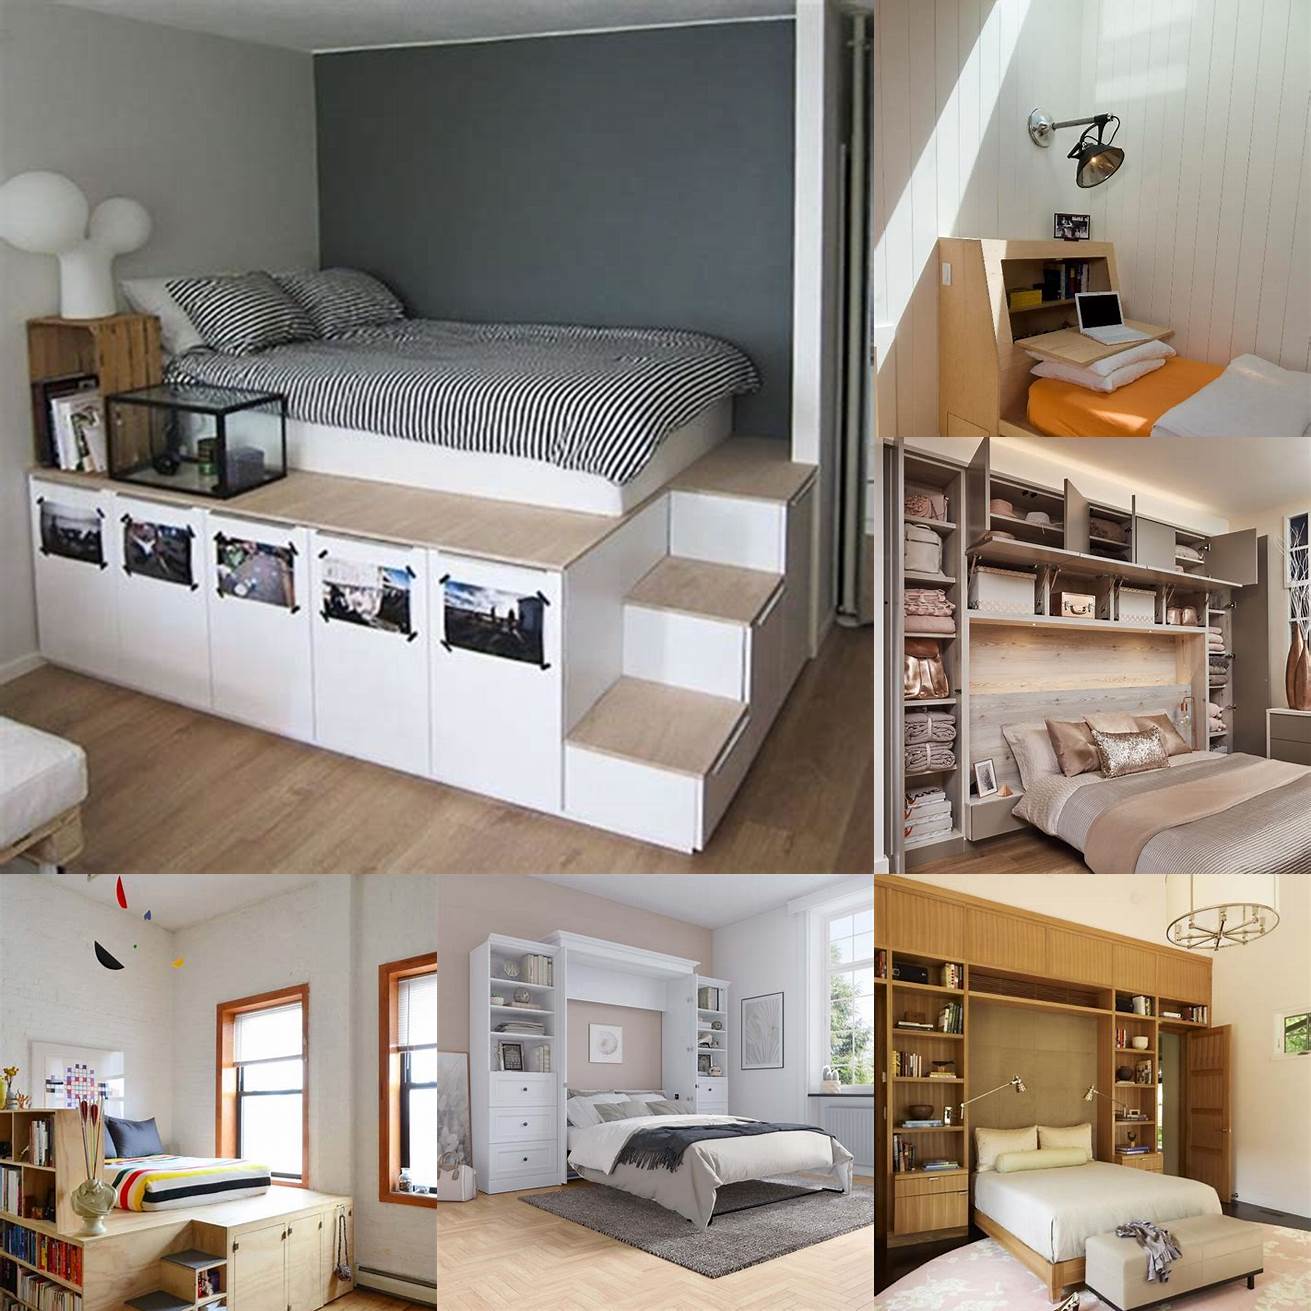 A low profile bed with built-in storage to maximize space in a small bedroom